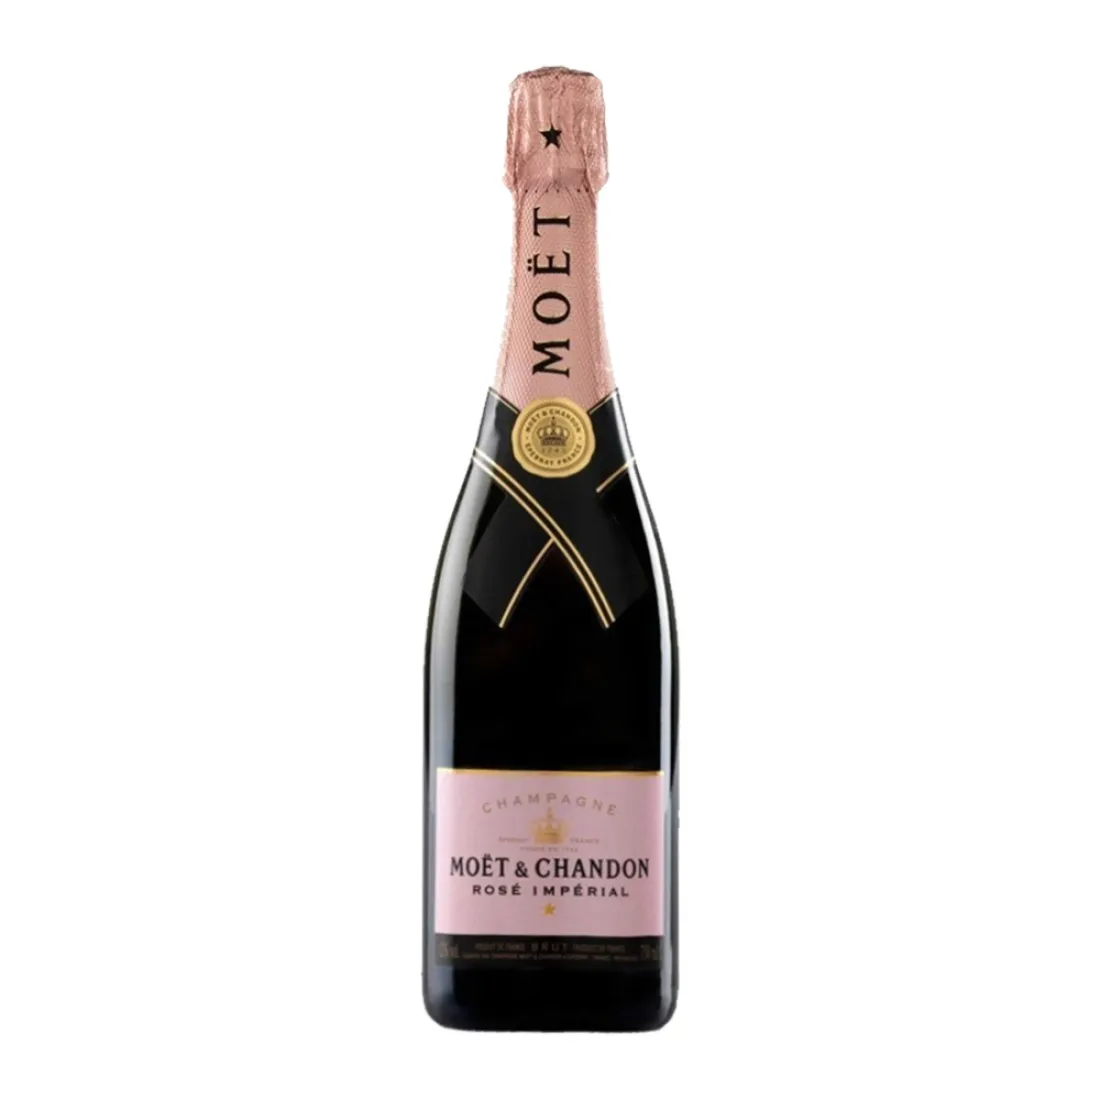 13 Incredibly Fun Champagne Gifts For Every Occasion